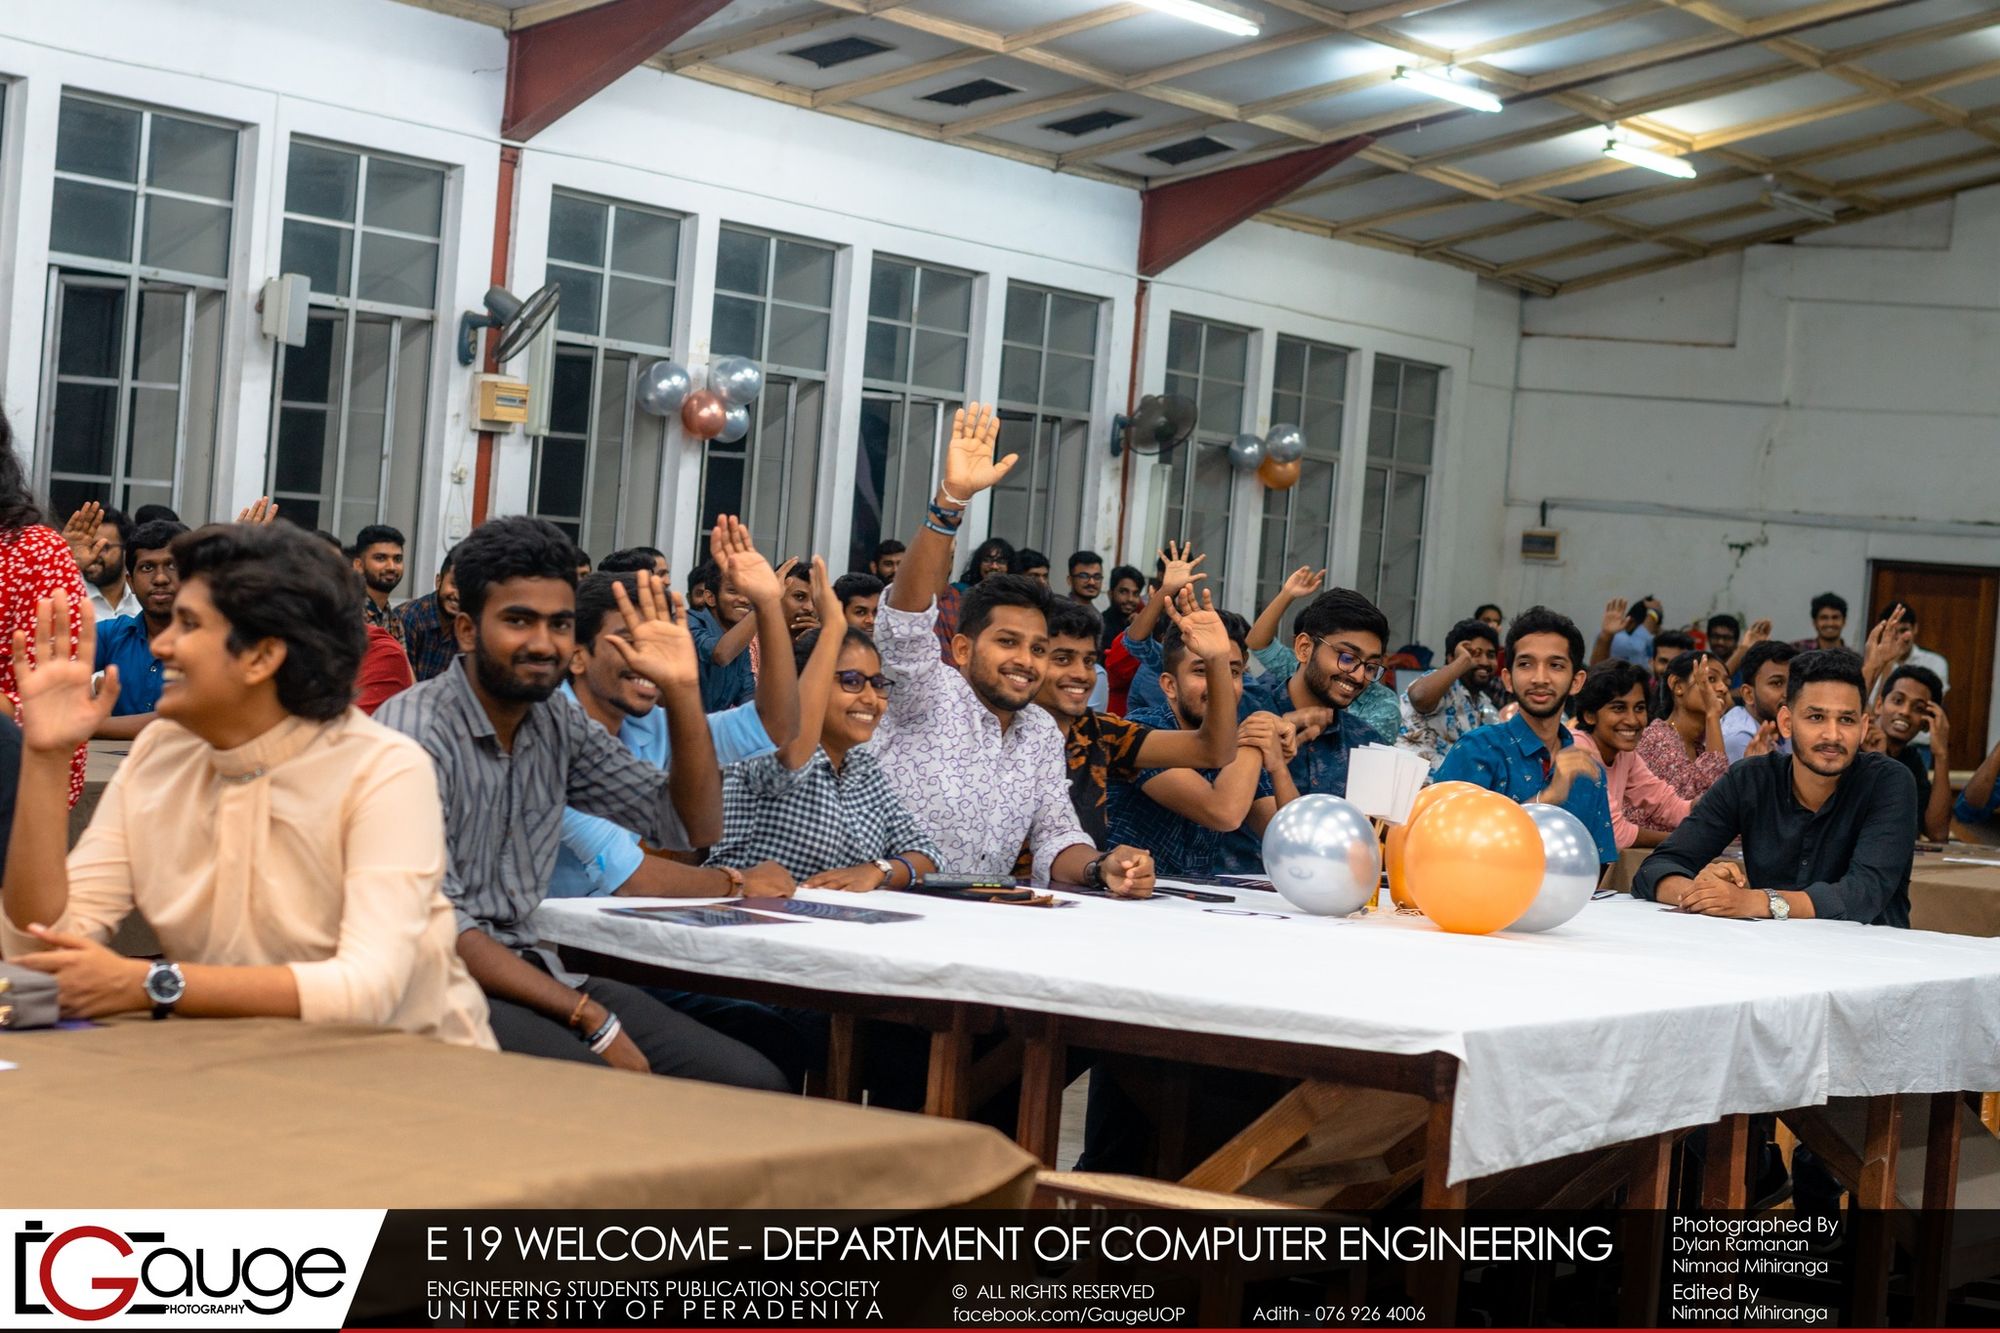 Departmental Welcome Party for E19 Computer Engineering Students